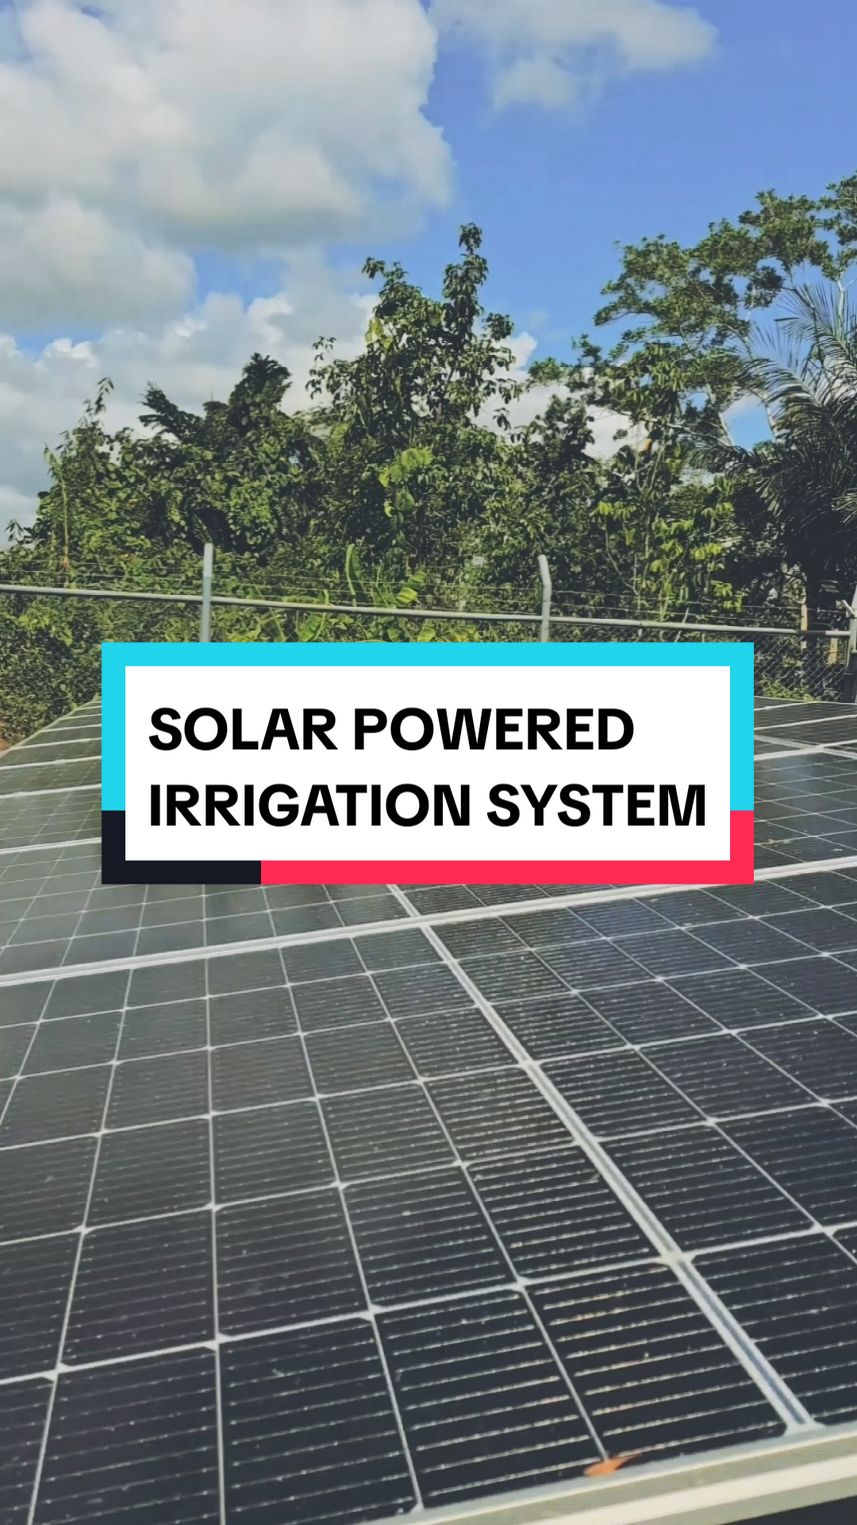 Solar Powered Irrigation System for  Corn Production☀️💦🌽 #paulniwre #solar #solarpower #irrigation #onlyforyou #viral #farm #fyp #engagement #agriculture #agriculturalandbiosystemsengineering 